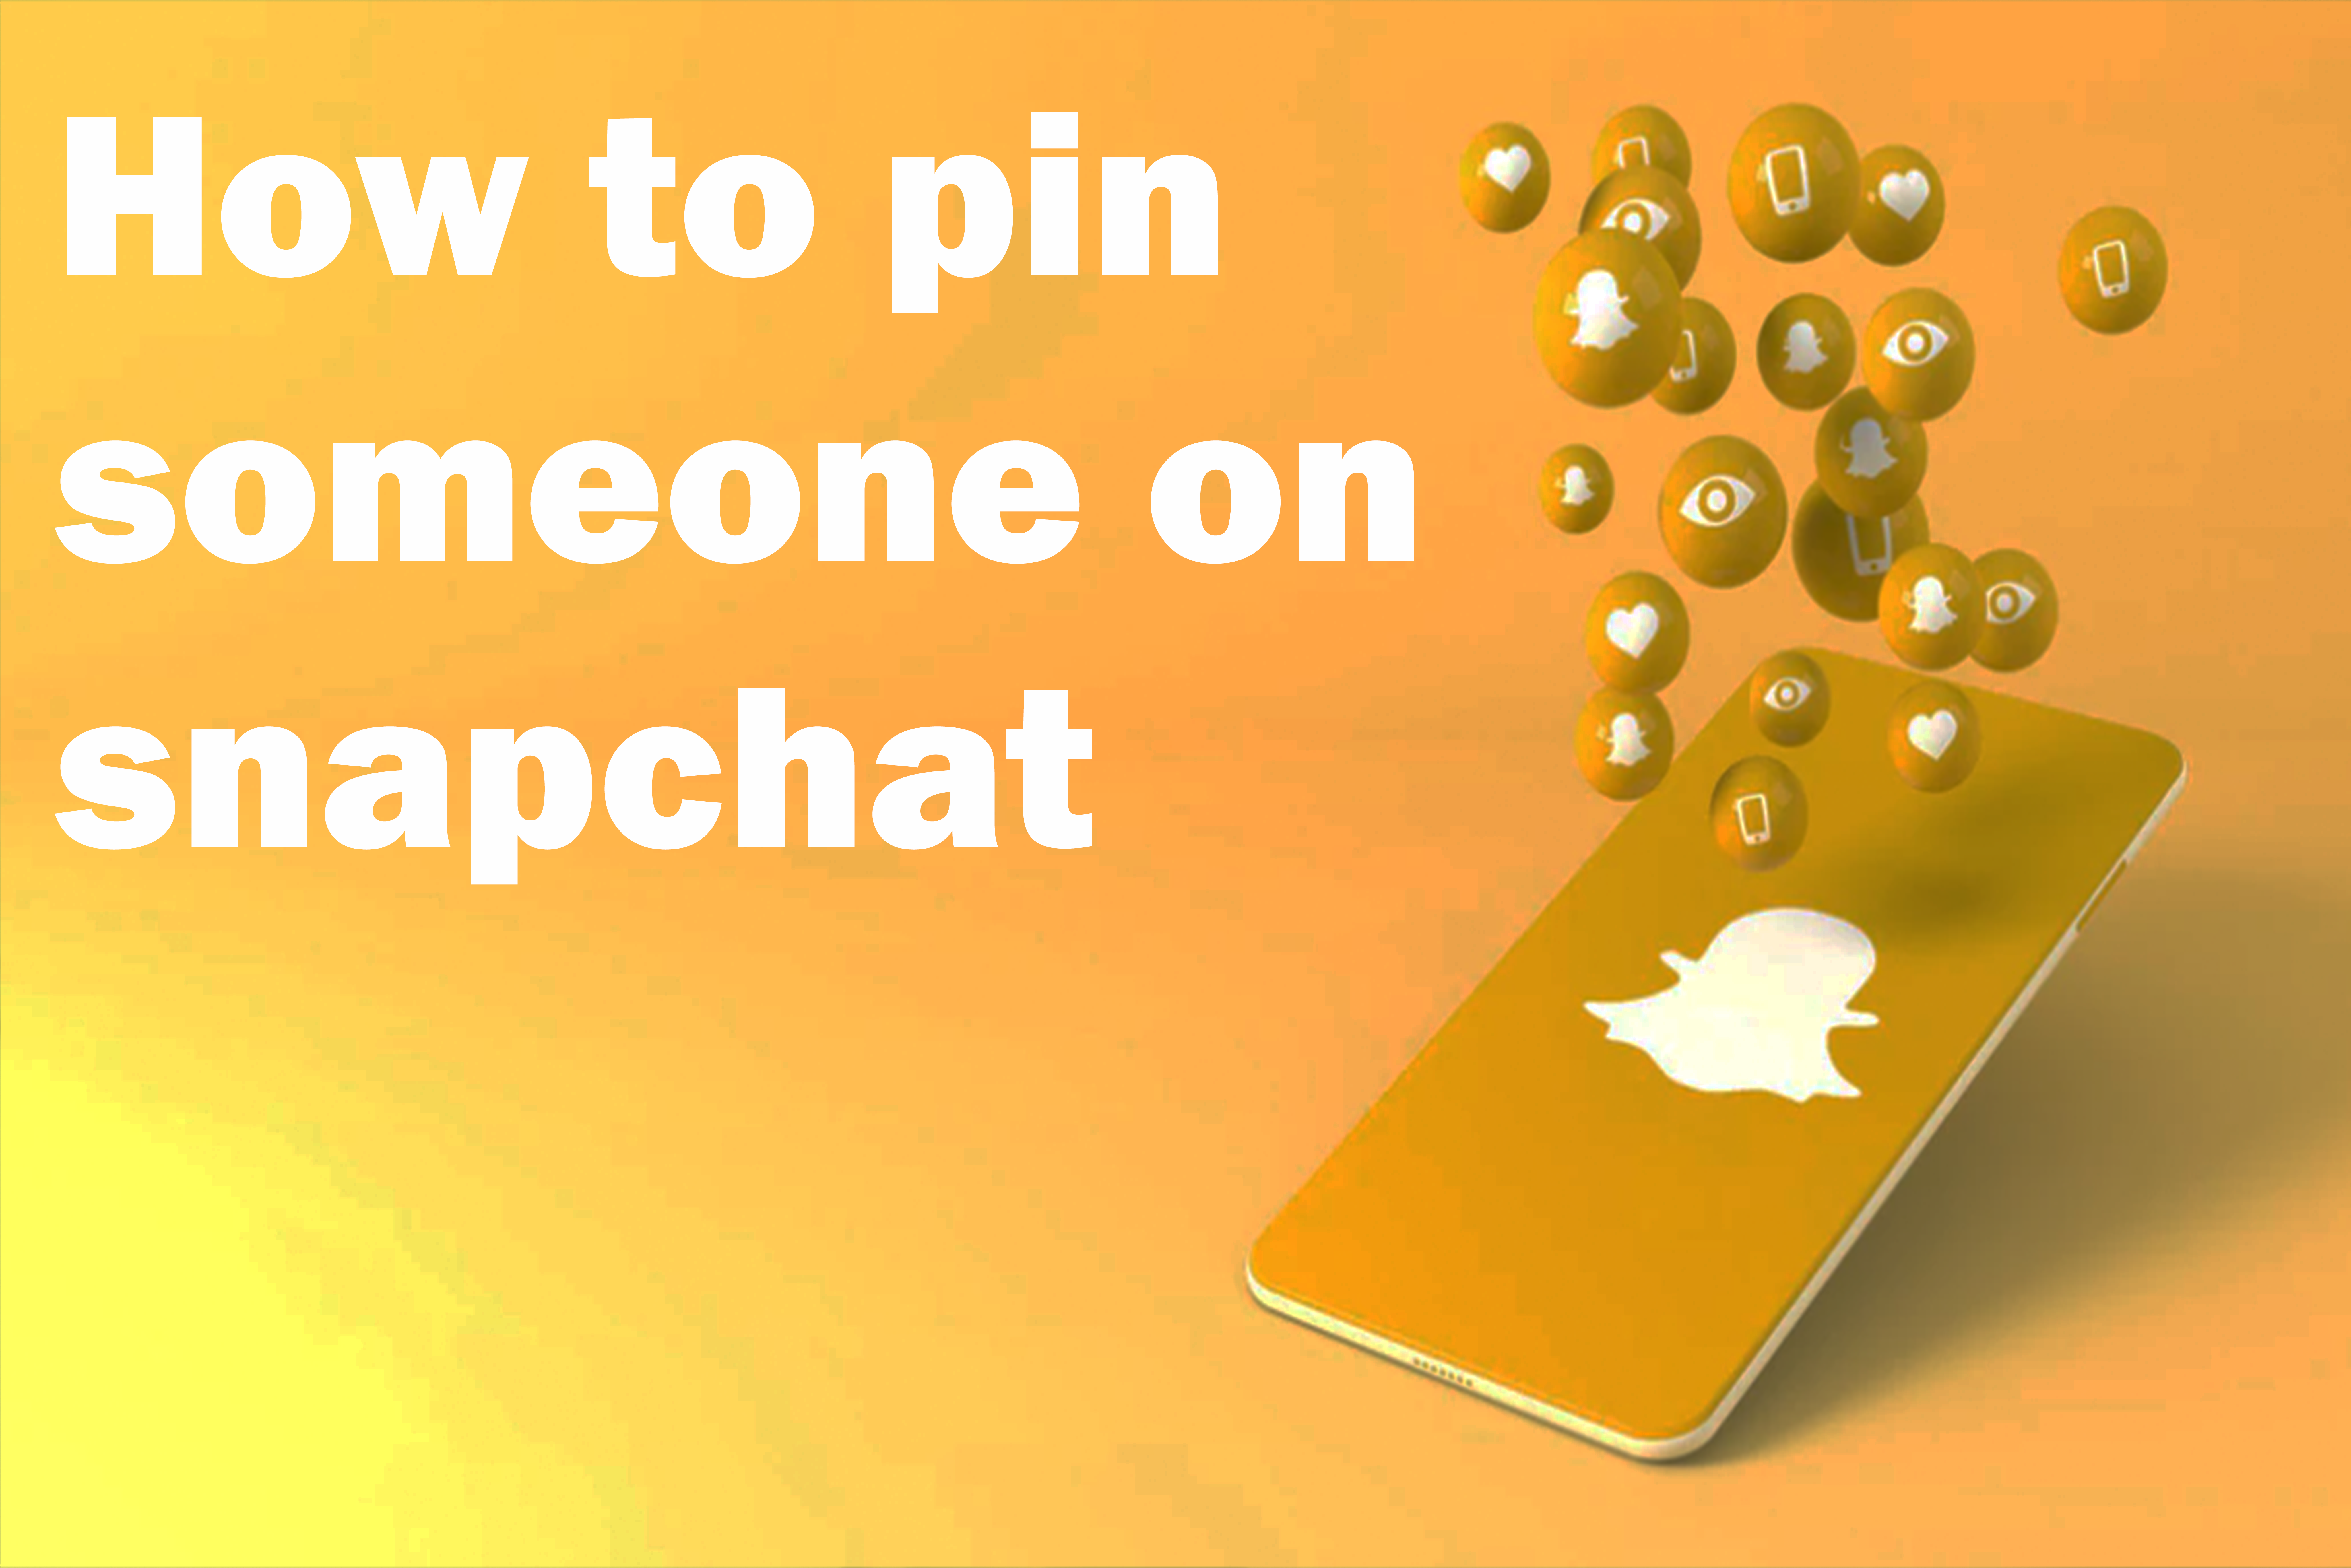 How to pin someone on snapchat